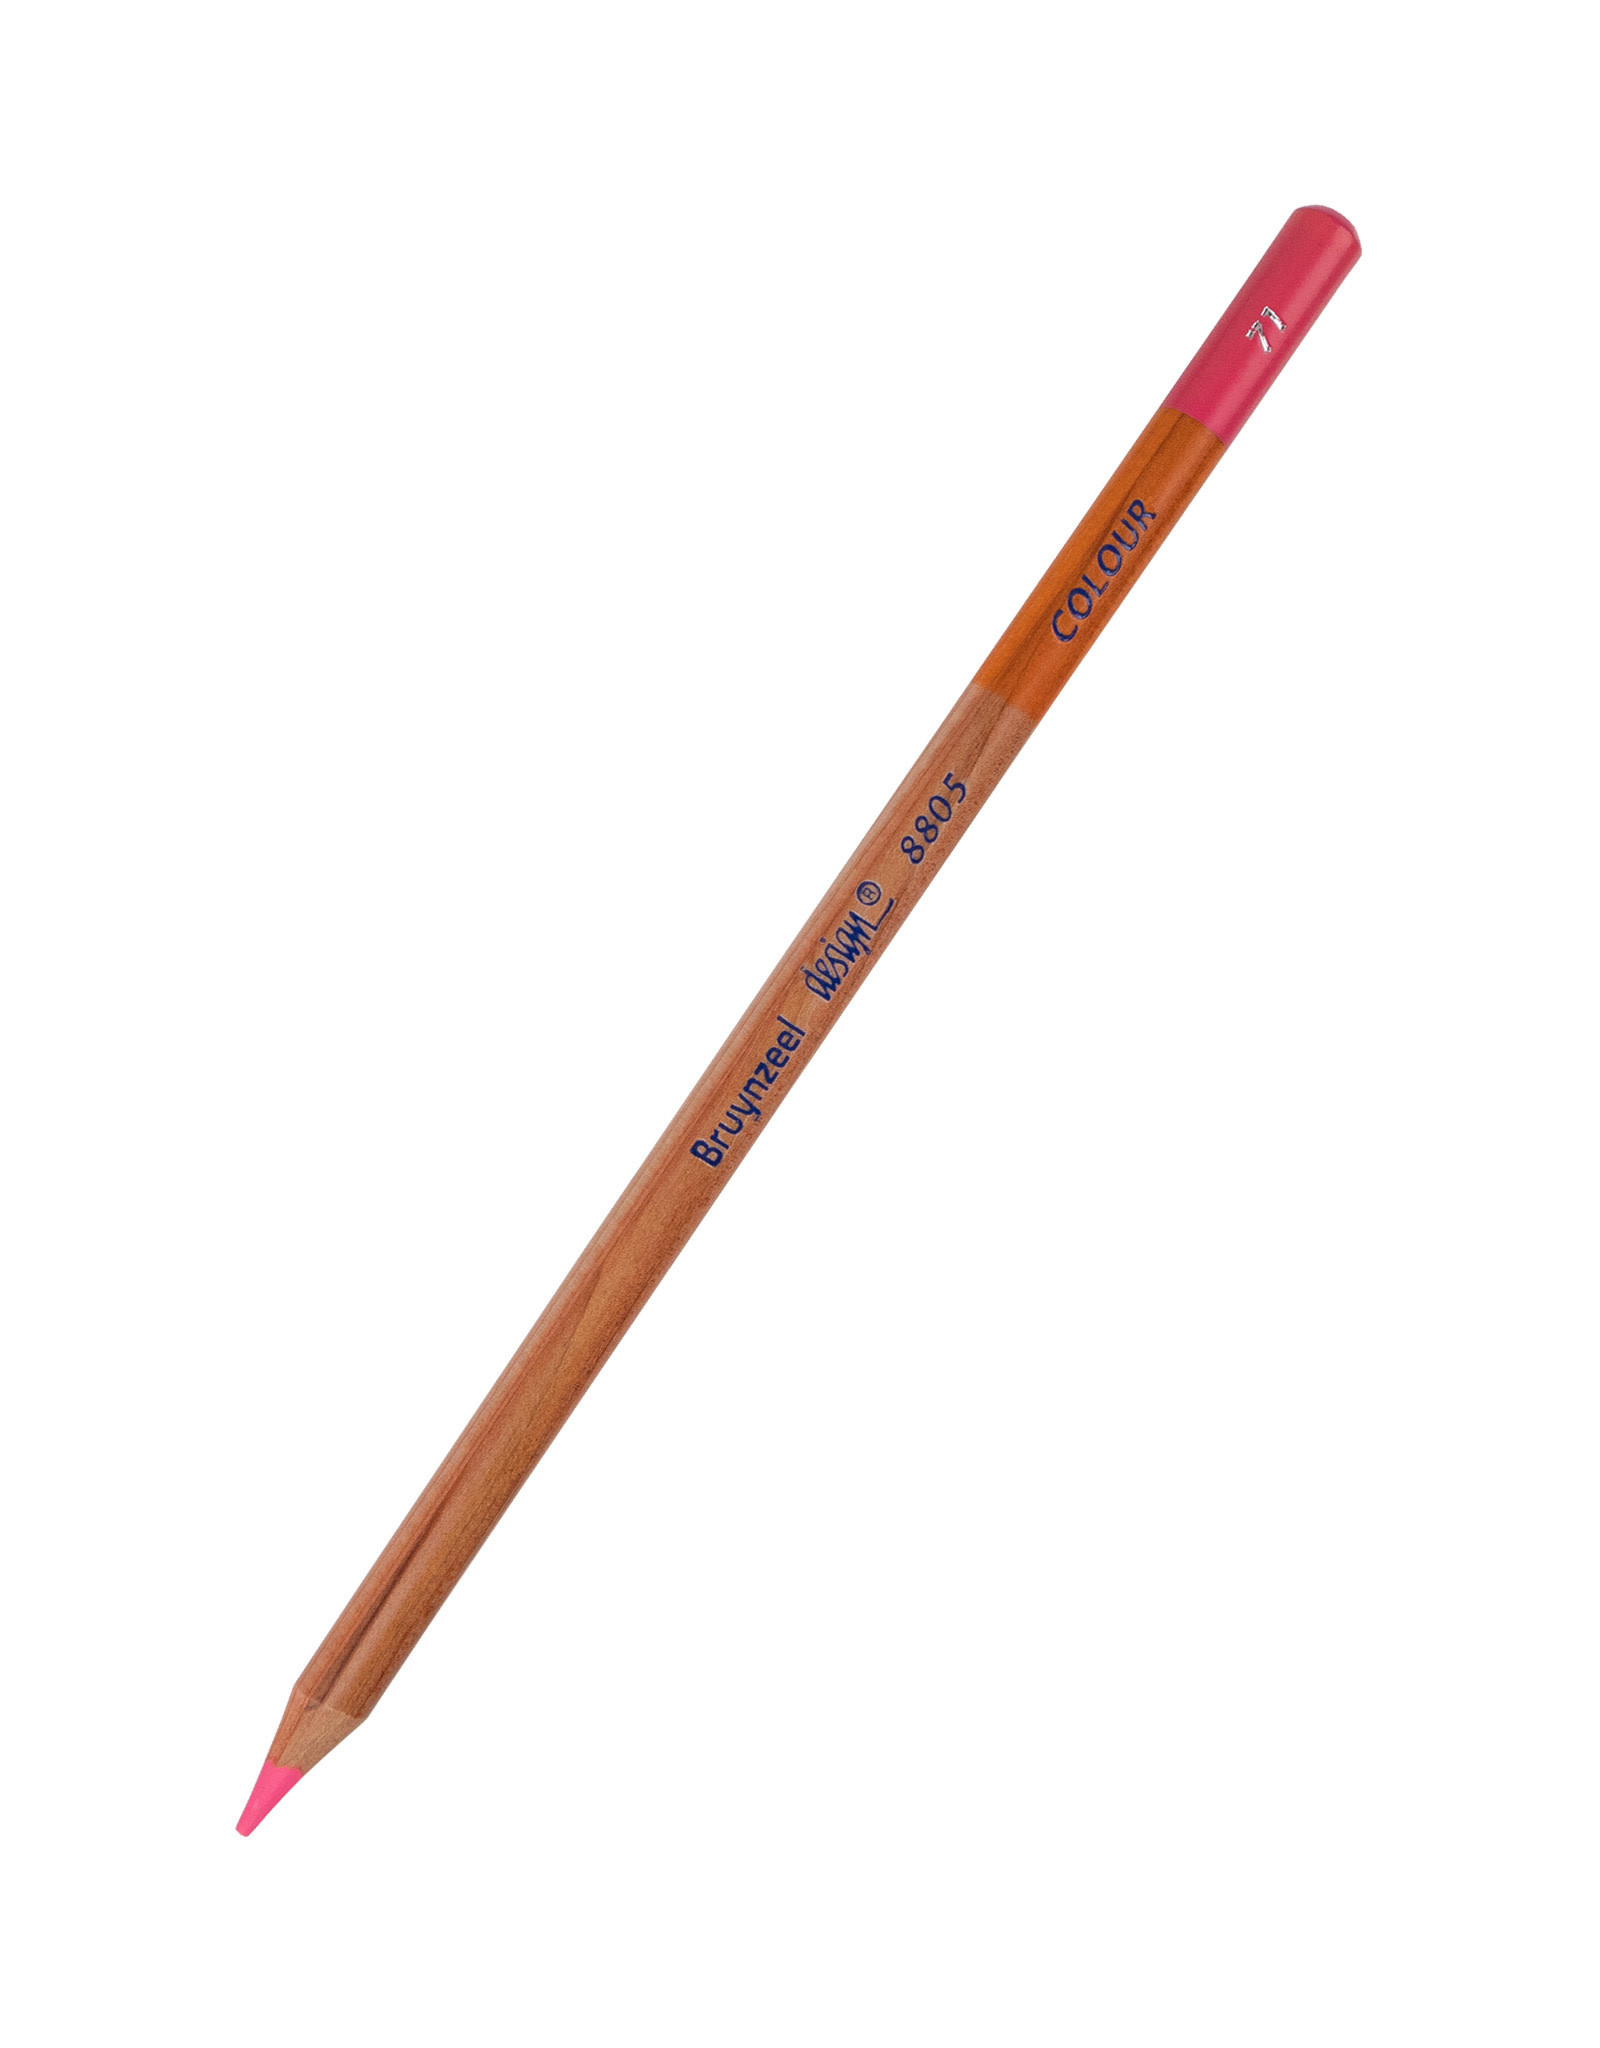 Royal Talens Bruynzeel Design Coloured Pencil, Candy Pink